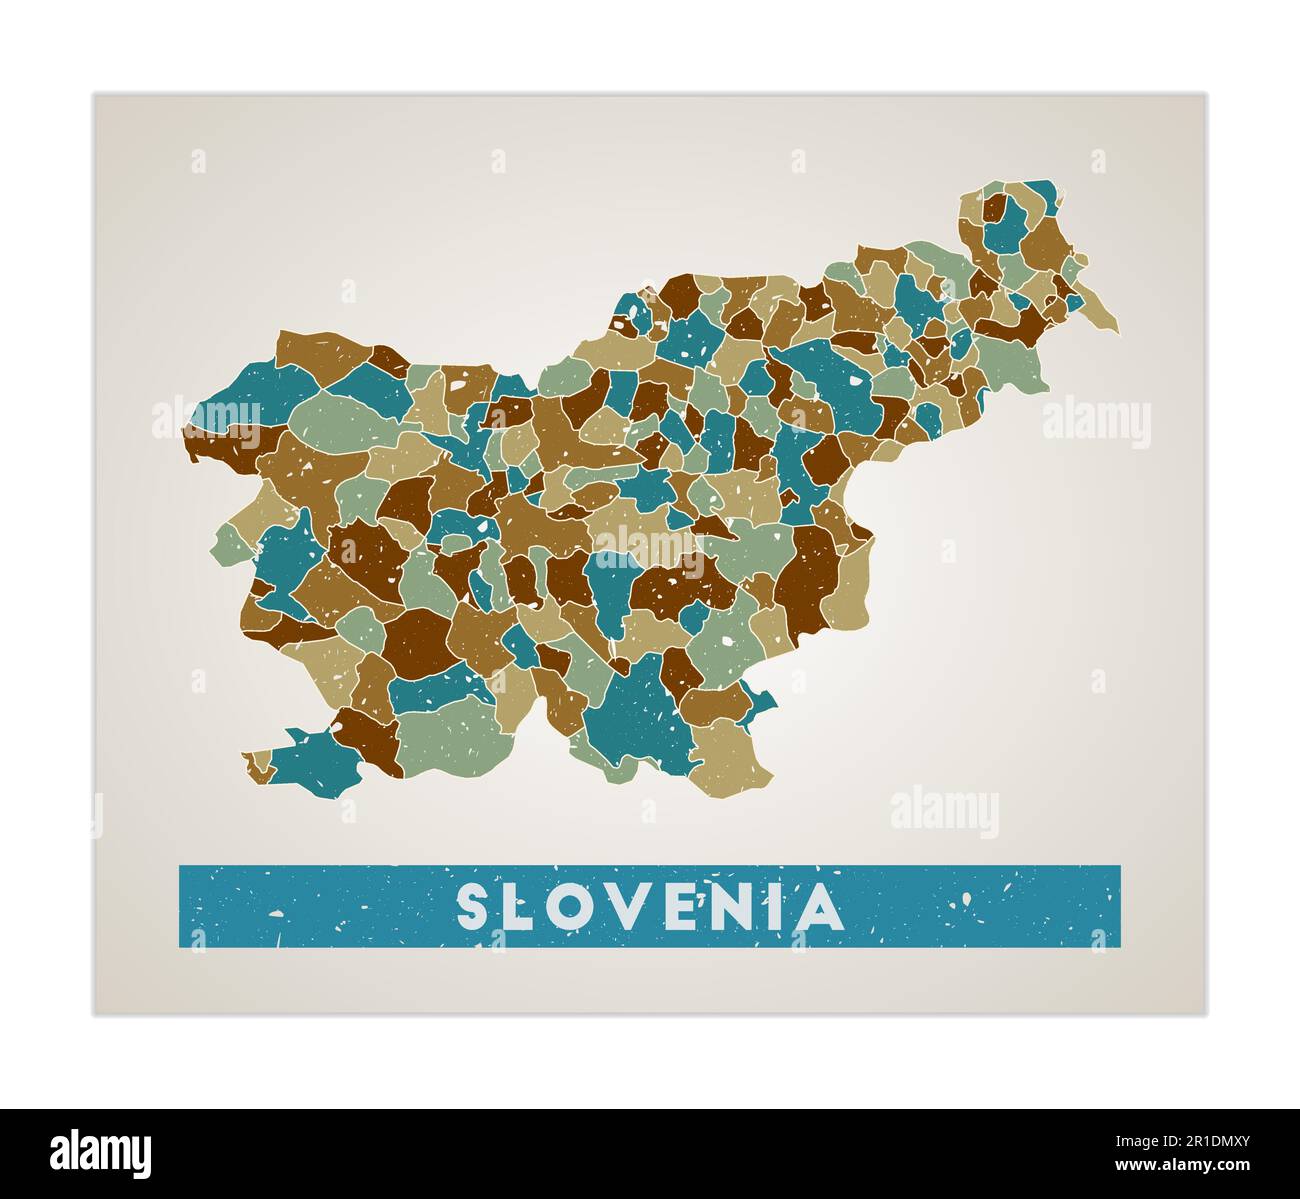 Slovenia map. Country poster with regions. Old grunge texture. Shape of Slovenia with country name. Radiant vector illustration. Stock Vector